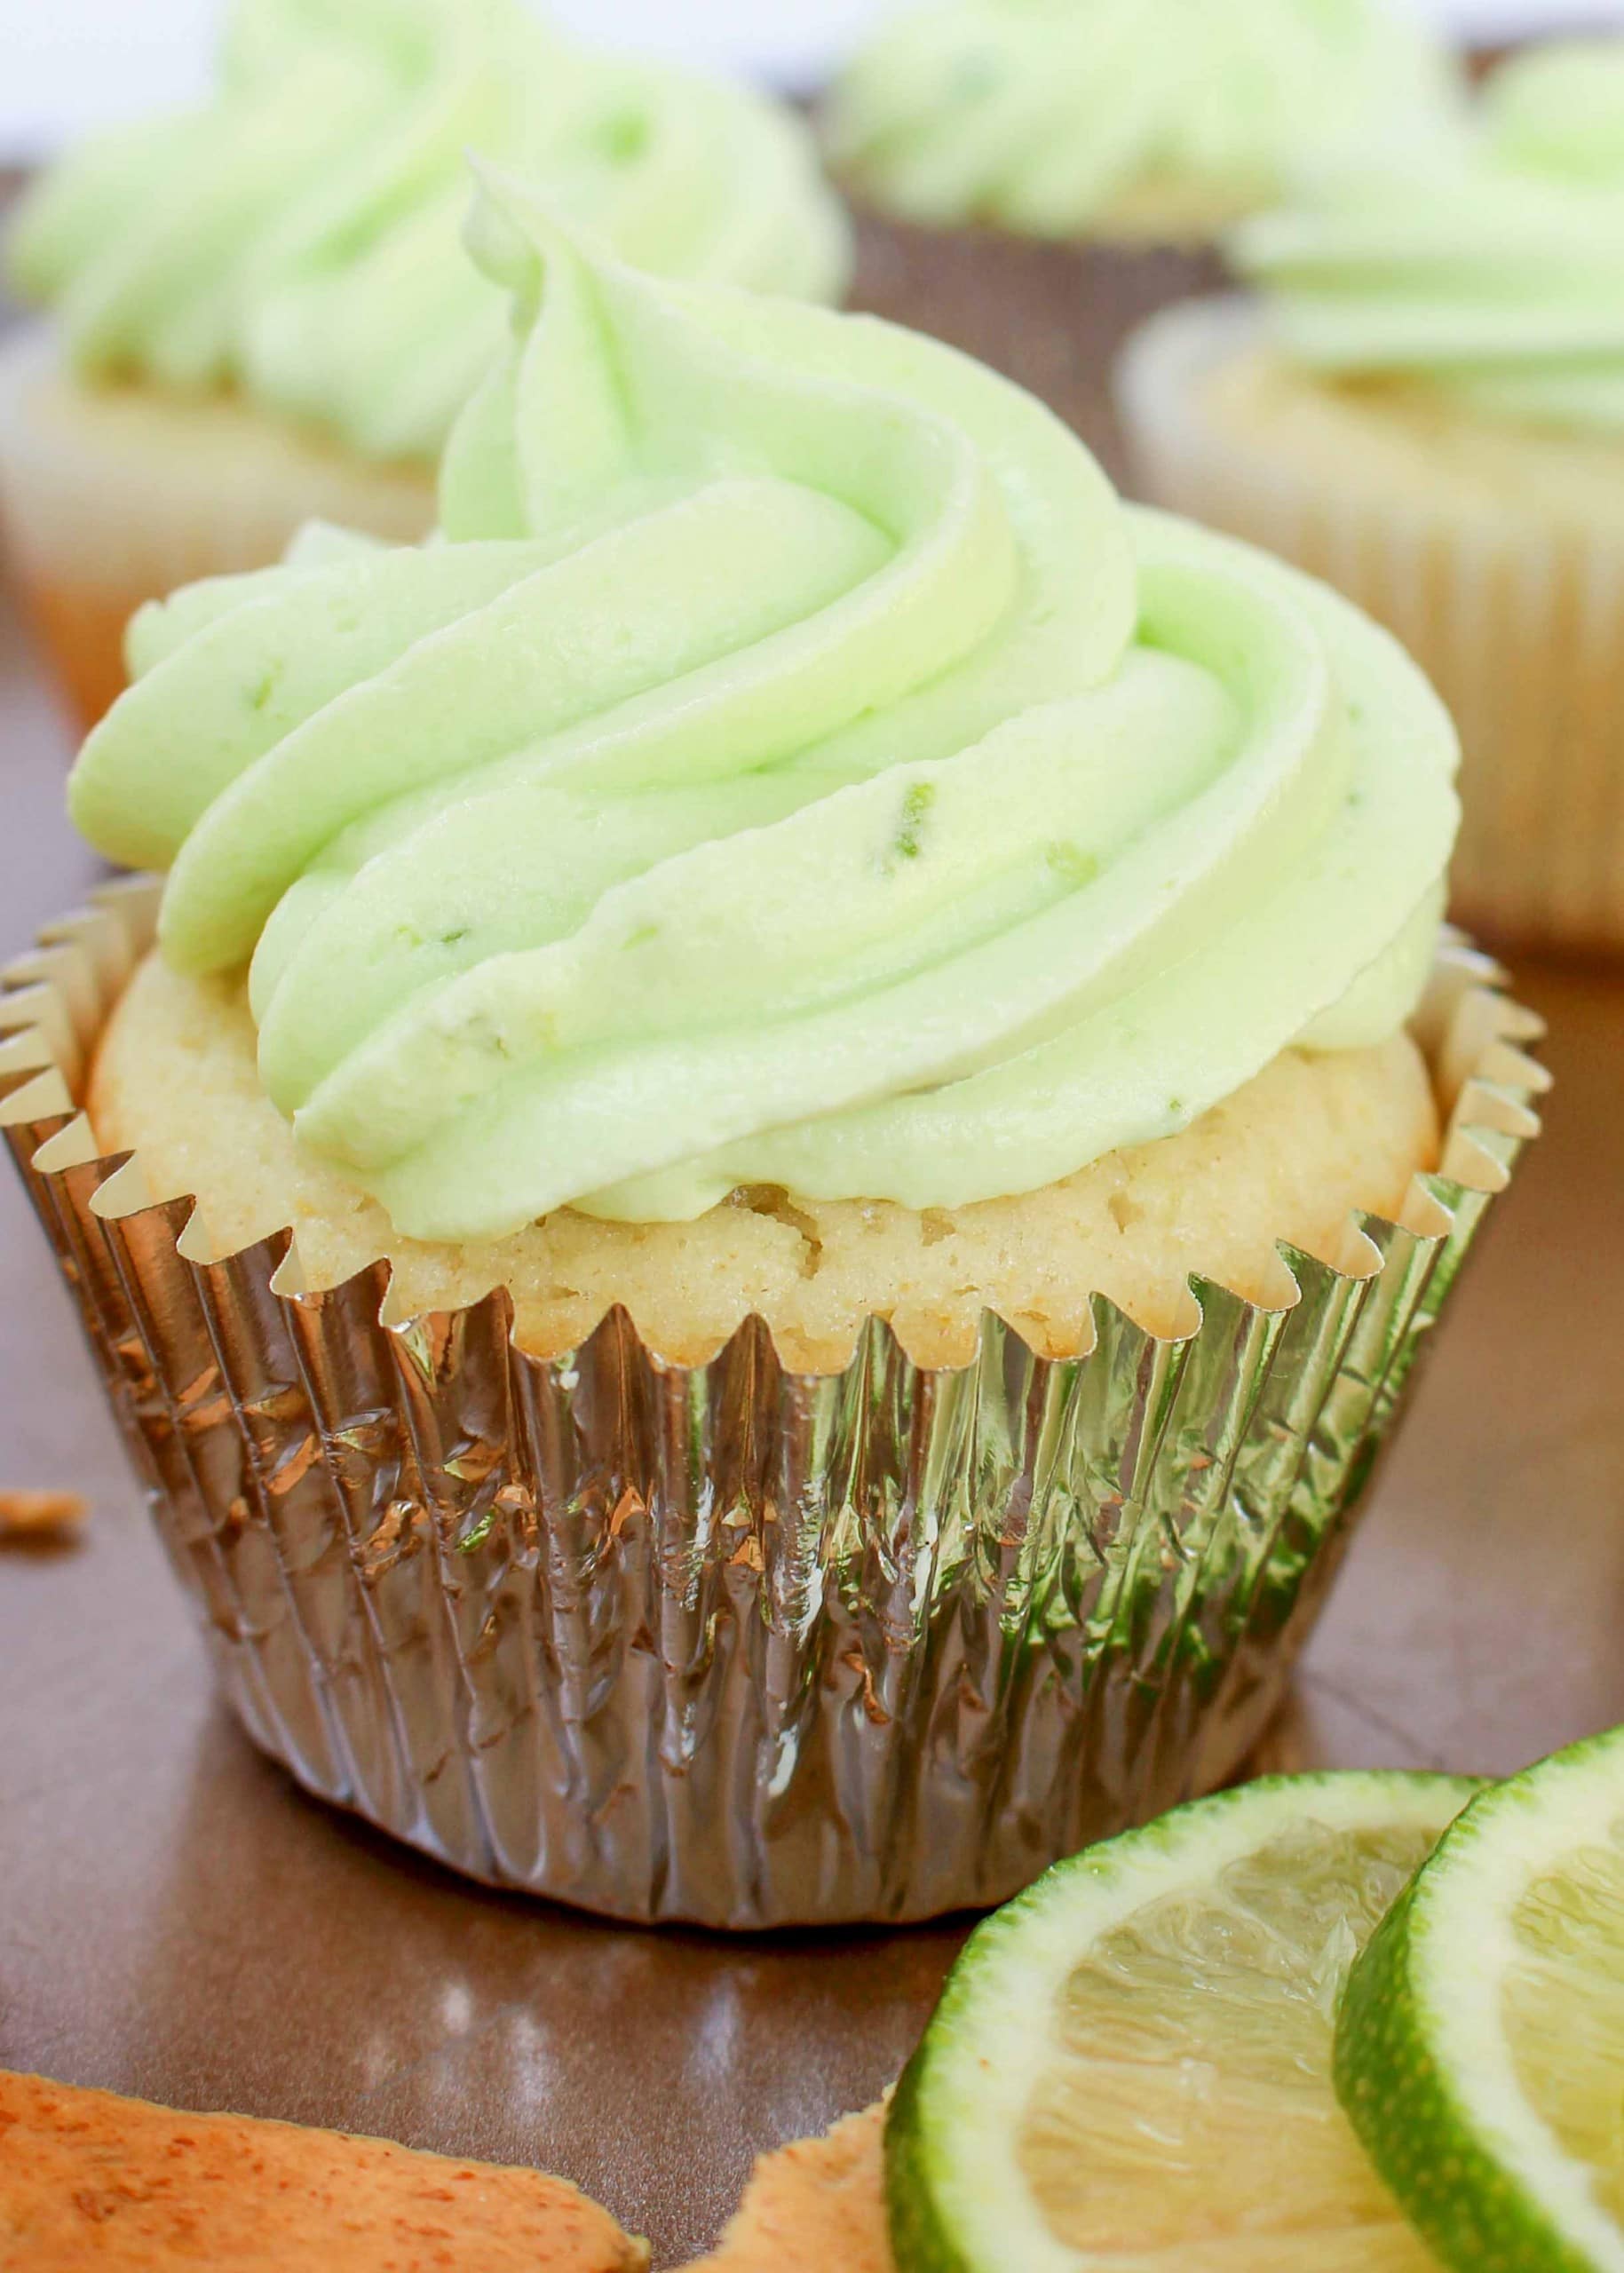 https://chocolatewithgrace.com/wp-content/uploads/2014/07/CWG-Key-Lime-Cupcakes-2-1-of-1-scaled.jpg